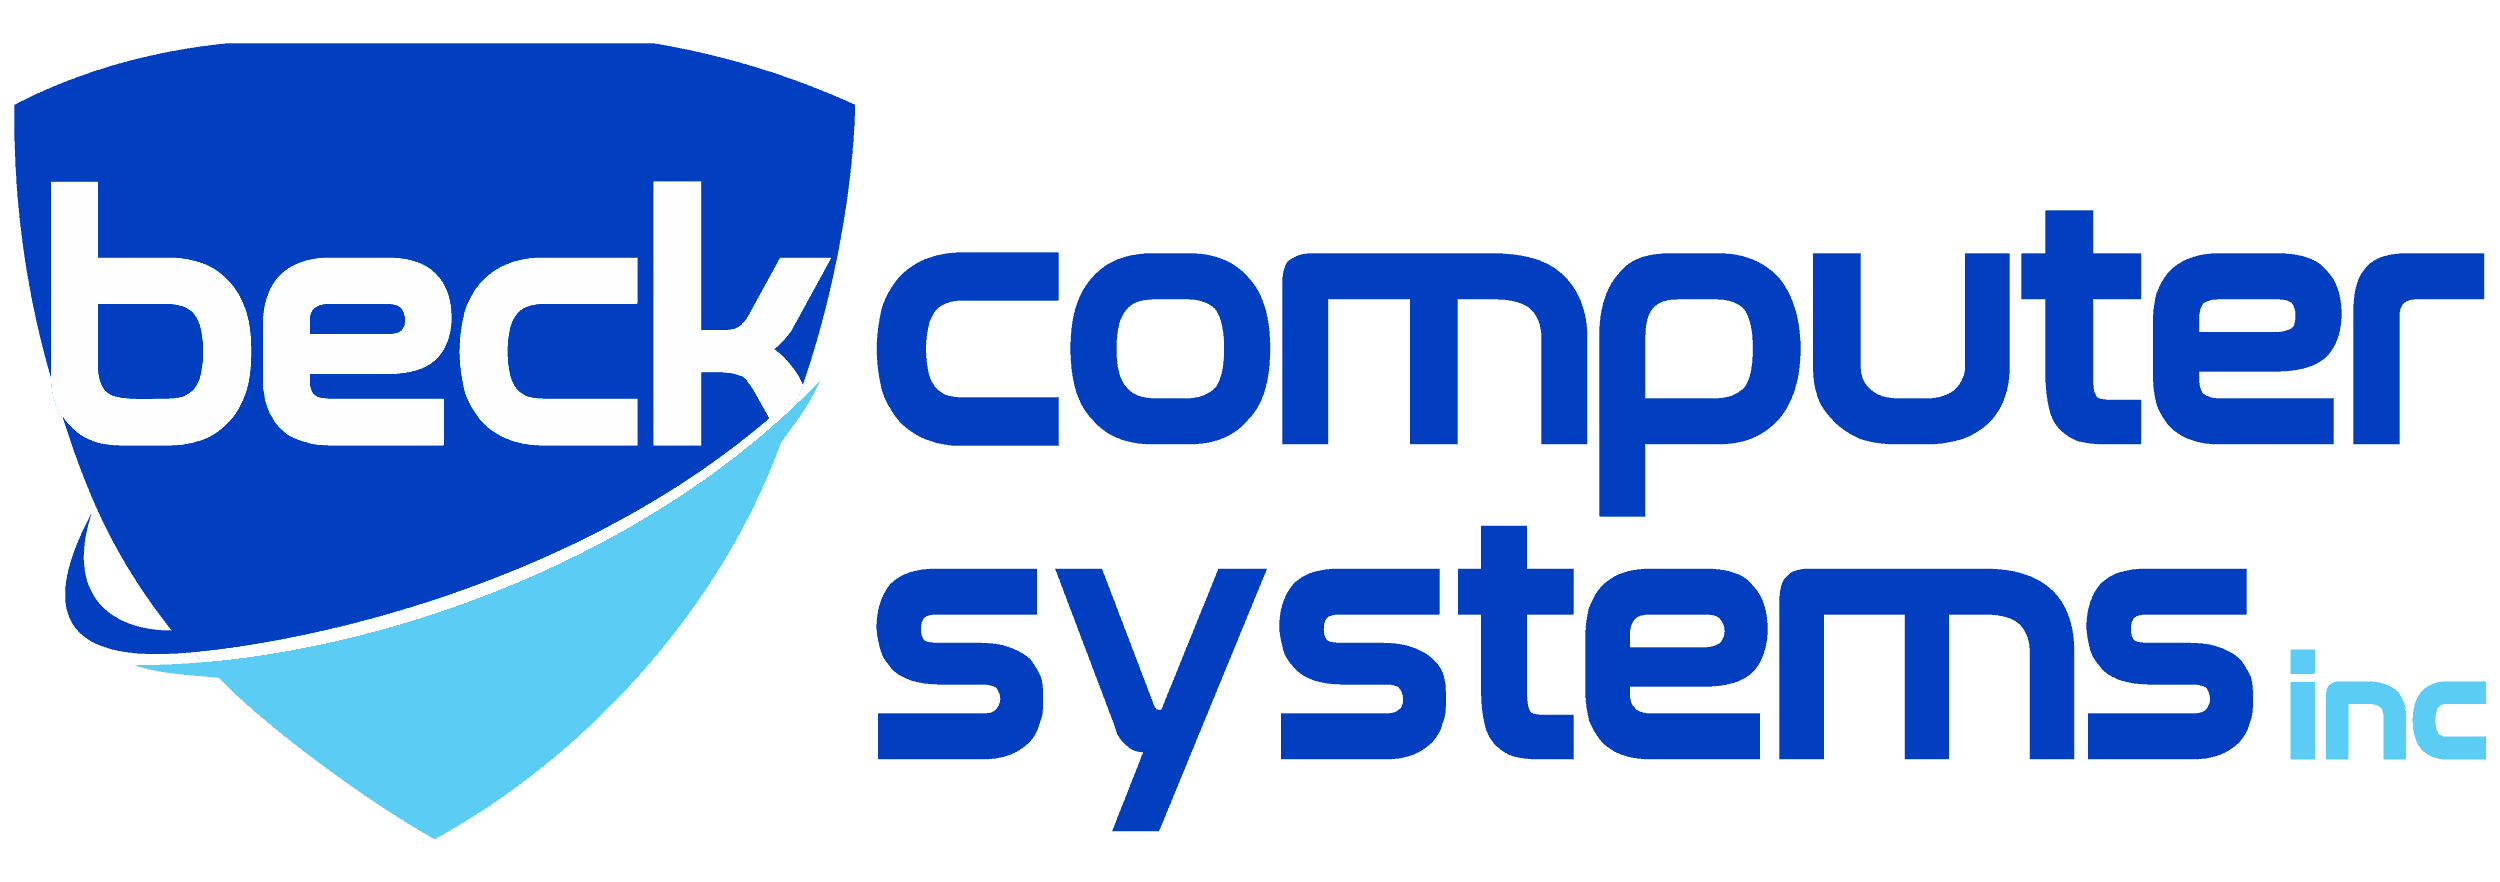 Beck Computer Systems, Inc.